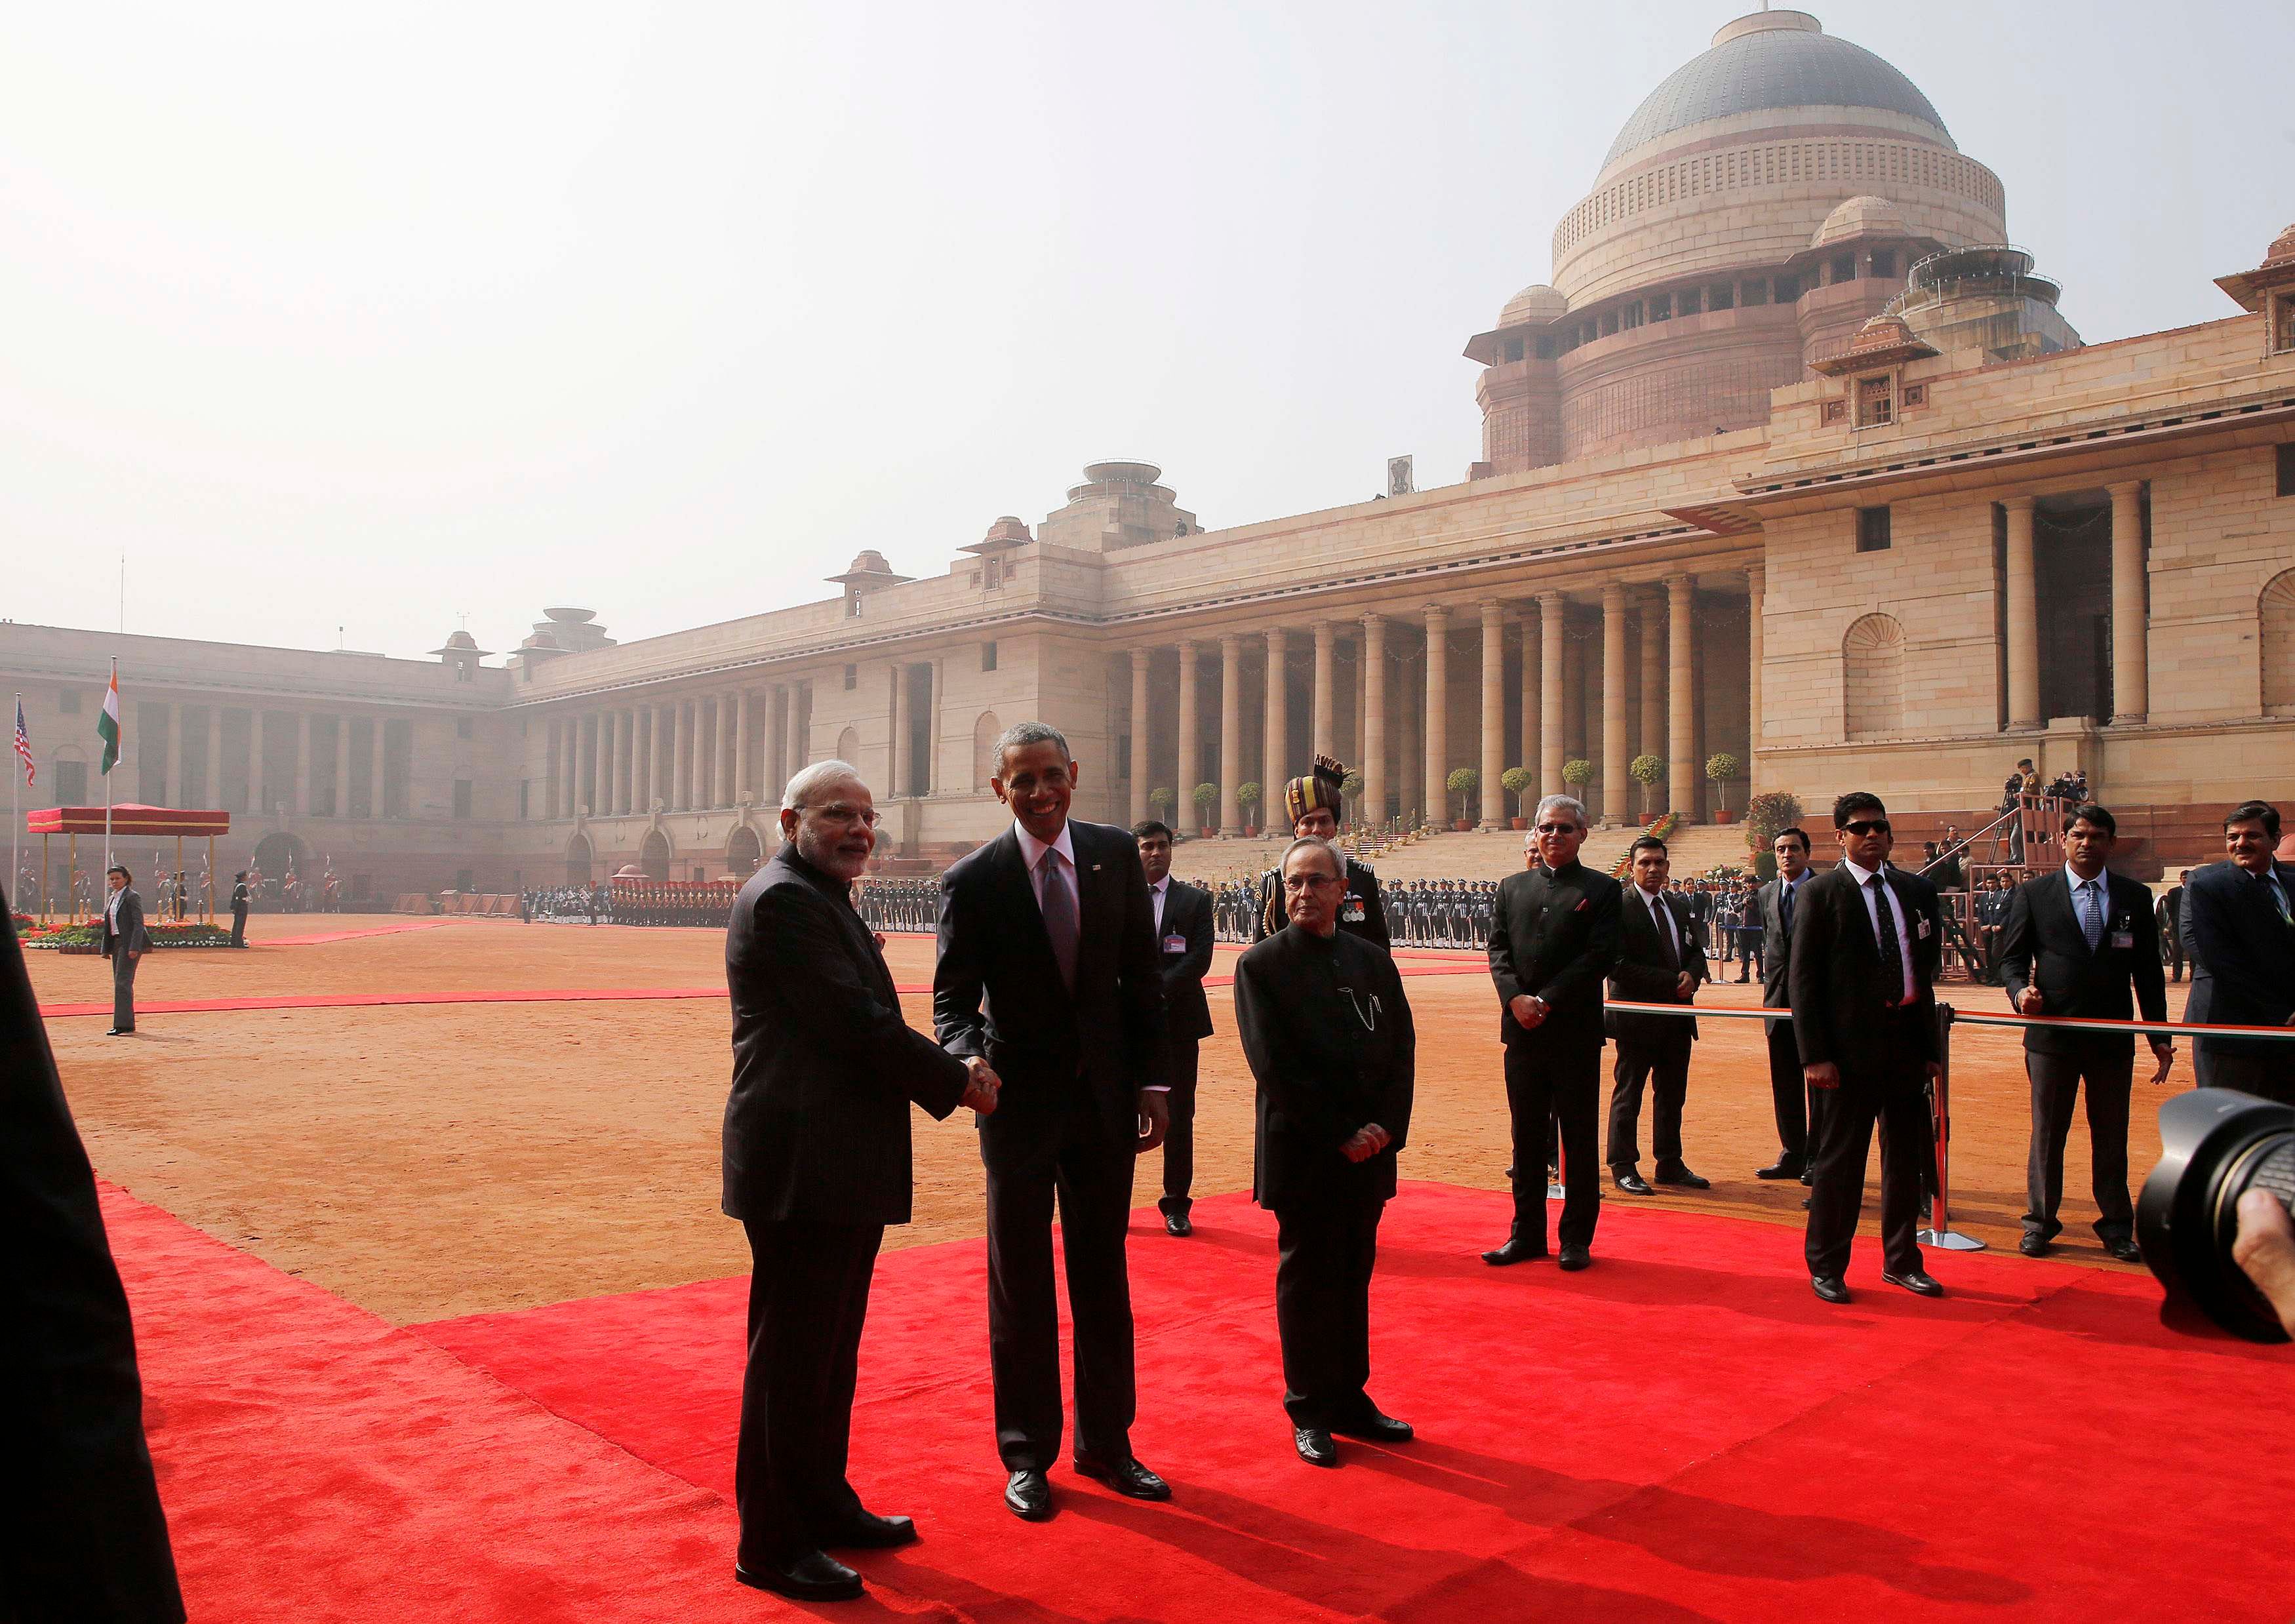 US President Barack Obama (C) shakes hands with India's Prime Minister Narendra Modi (L) as they stand with President Pranab Mukherjee in front of the Rashtrapati Bhavan presidential palace in New Delhi January 25, 2015. Photo: Reuters